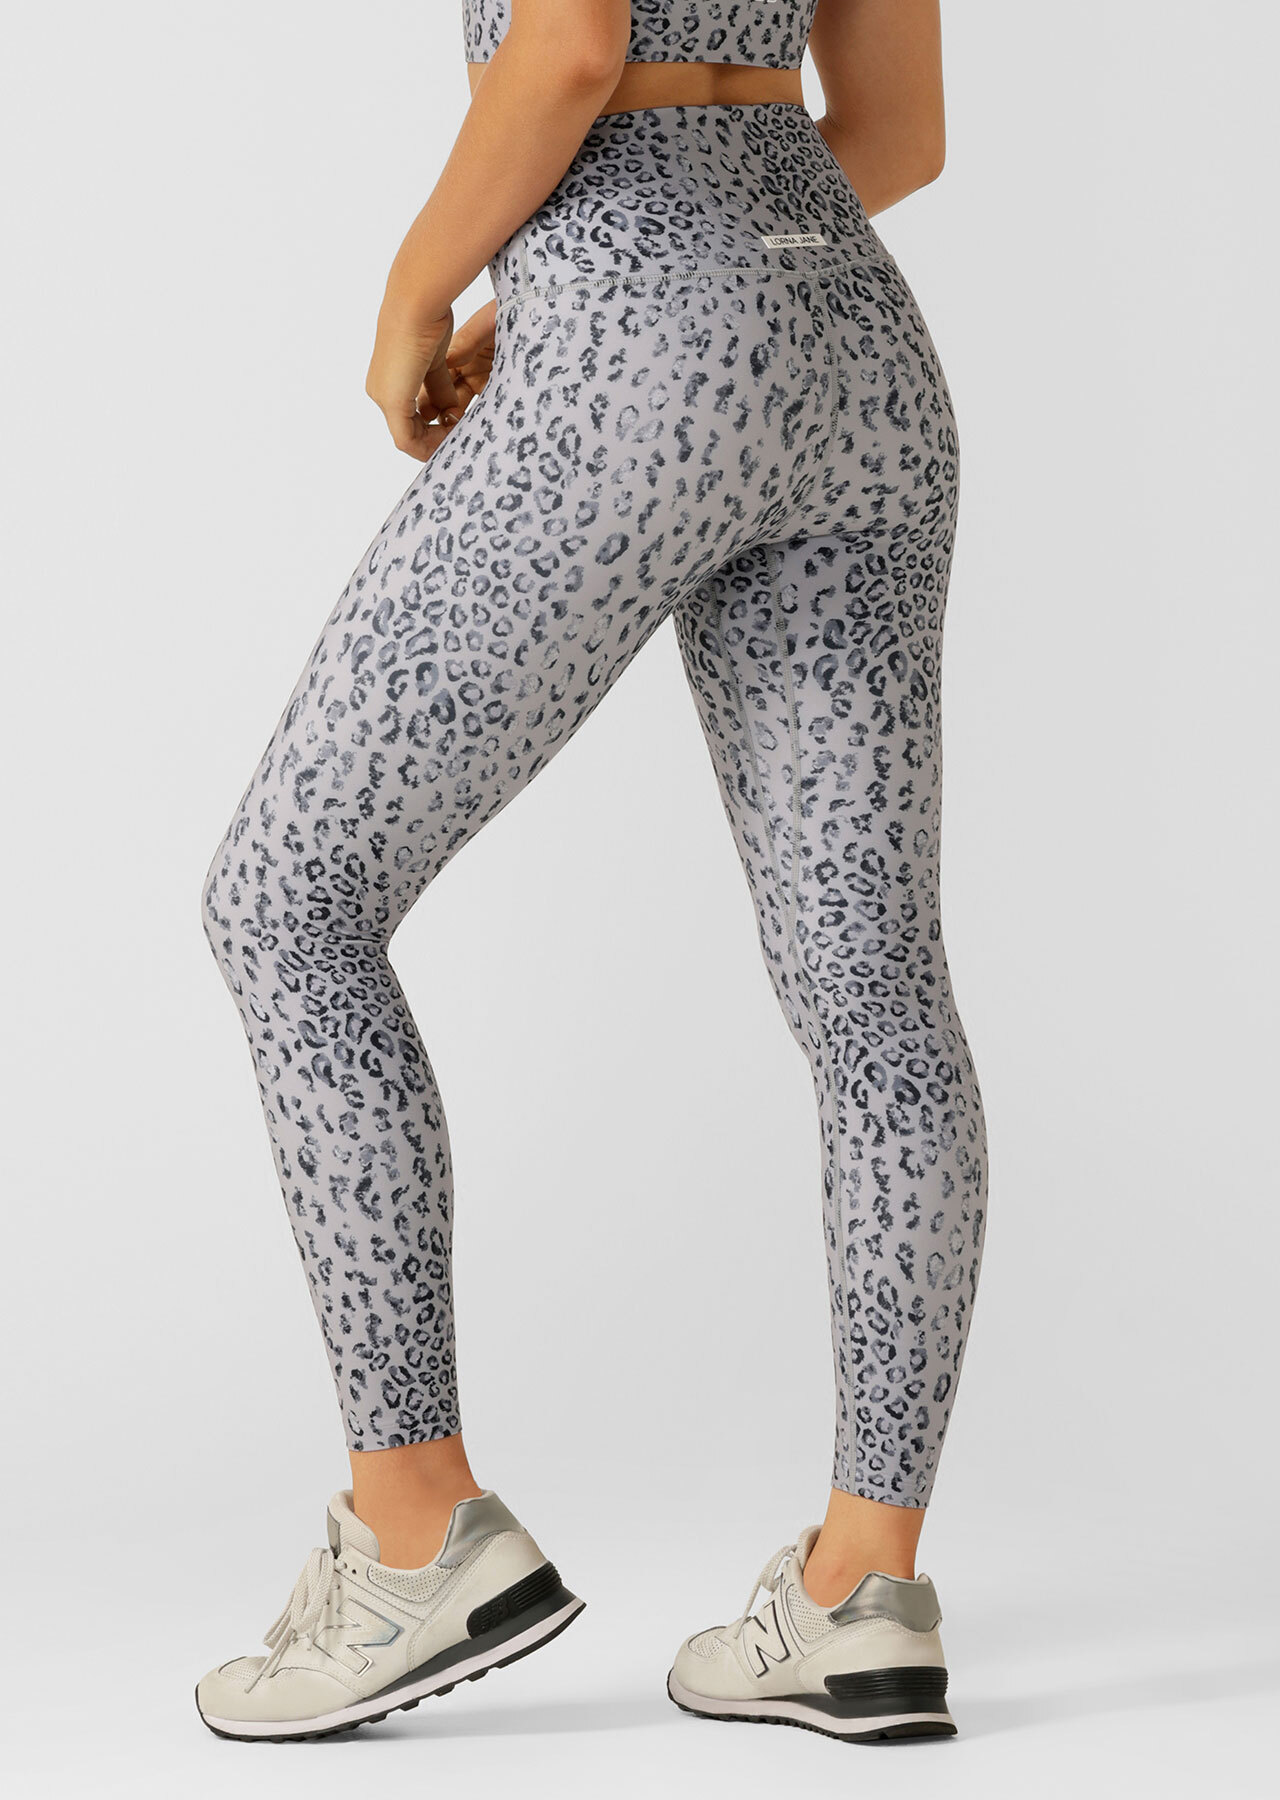 Ankle Leggings S L 3X GRAY LEOPARD Print w/Stretch No Boundaries Juniors  NEW - Helia Beer Co